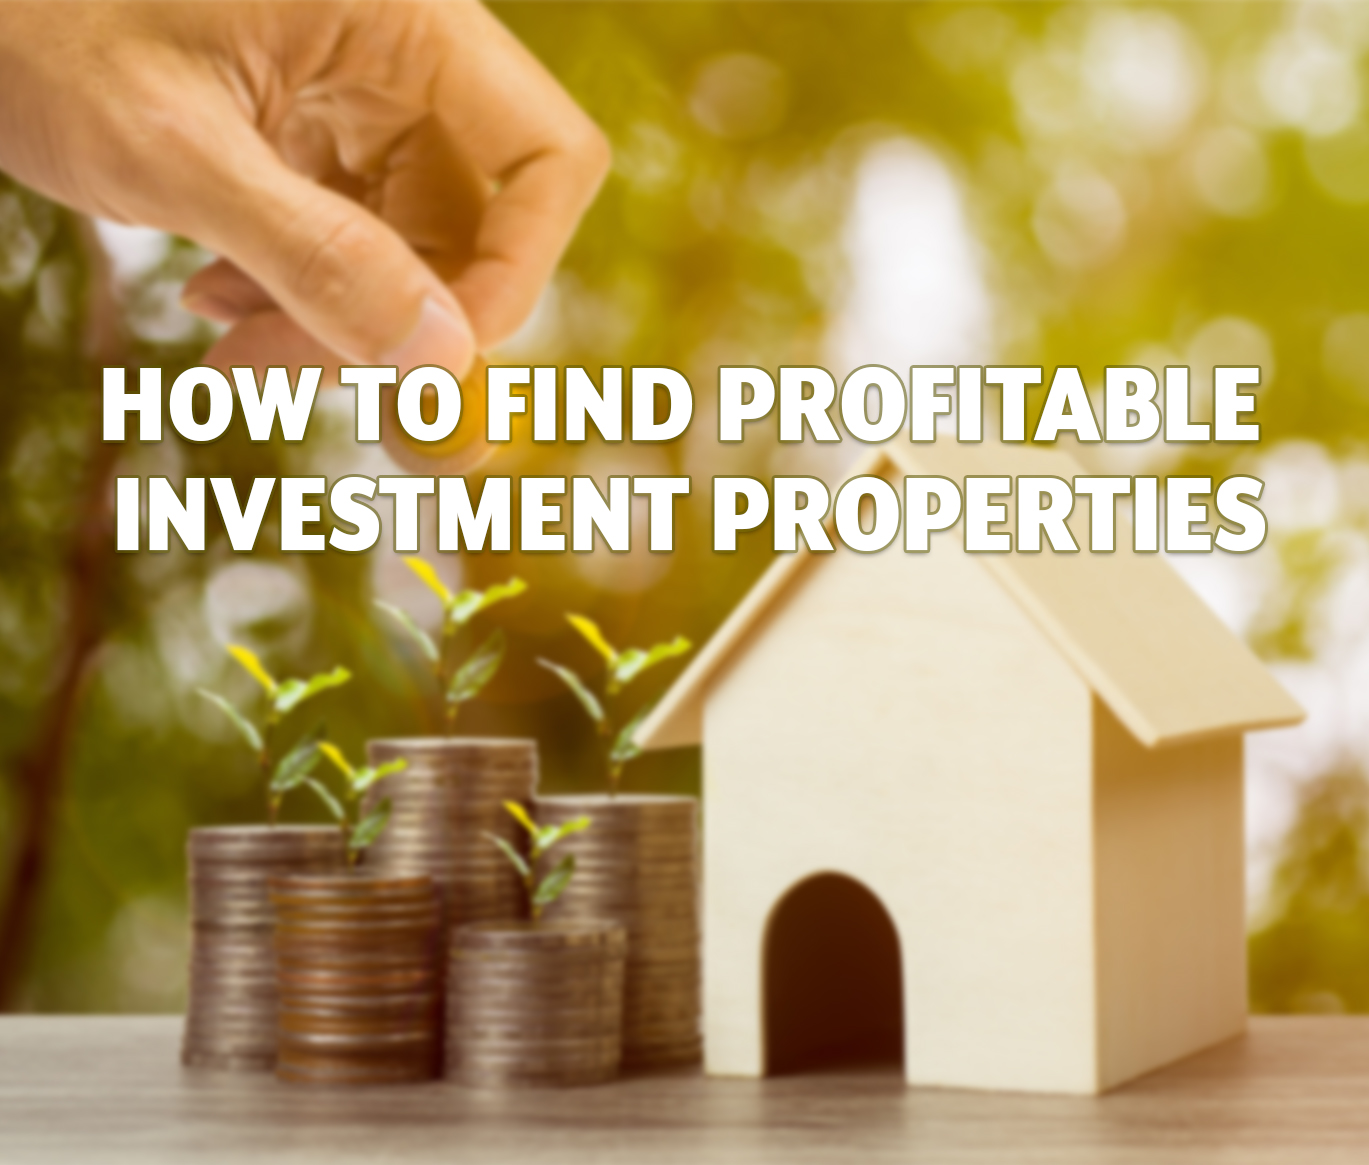 How To Find Profitable Investment Properties